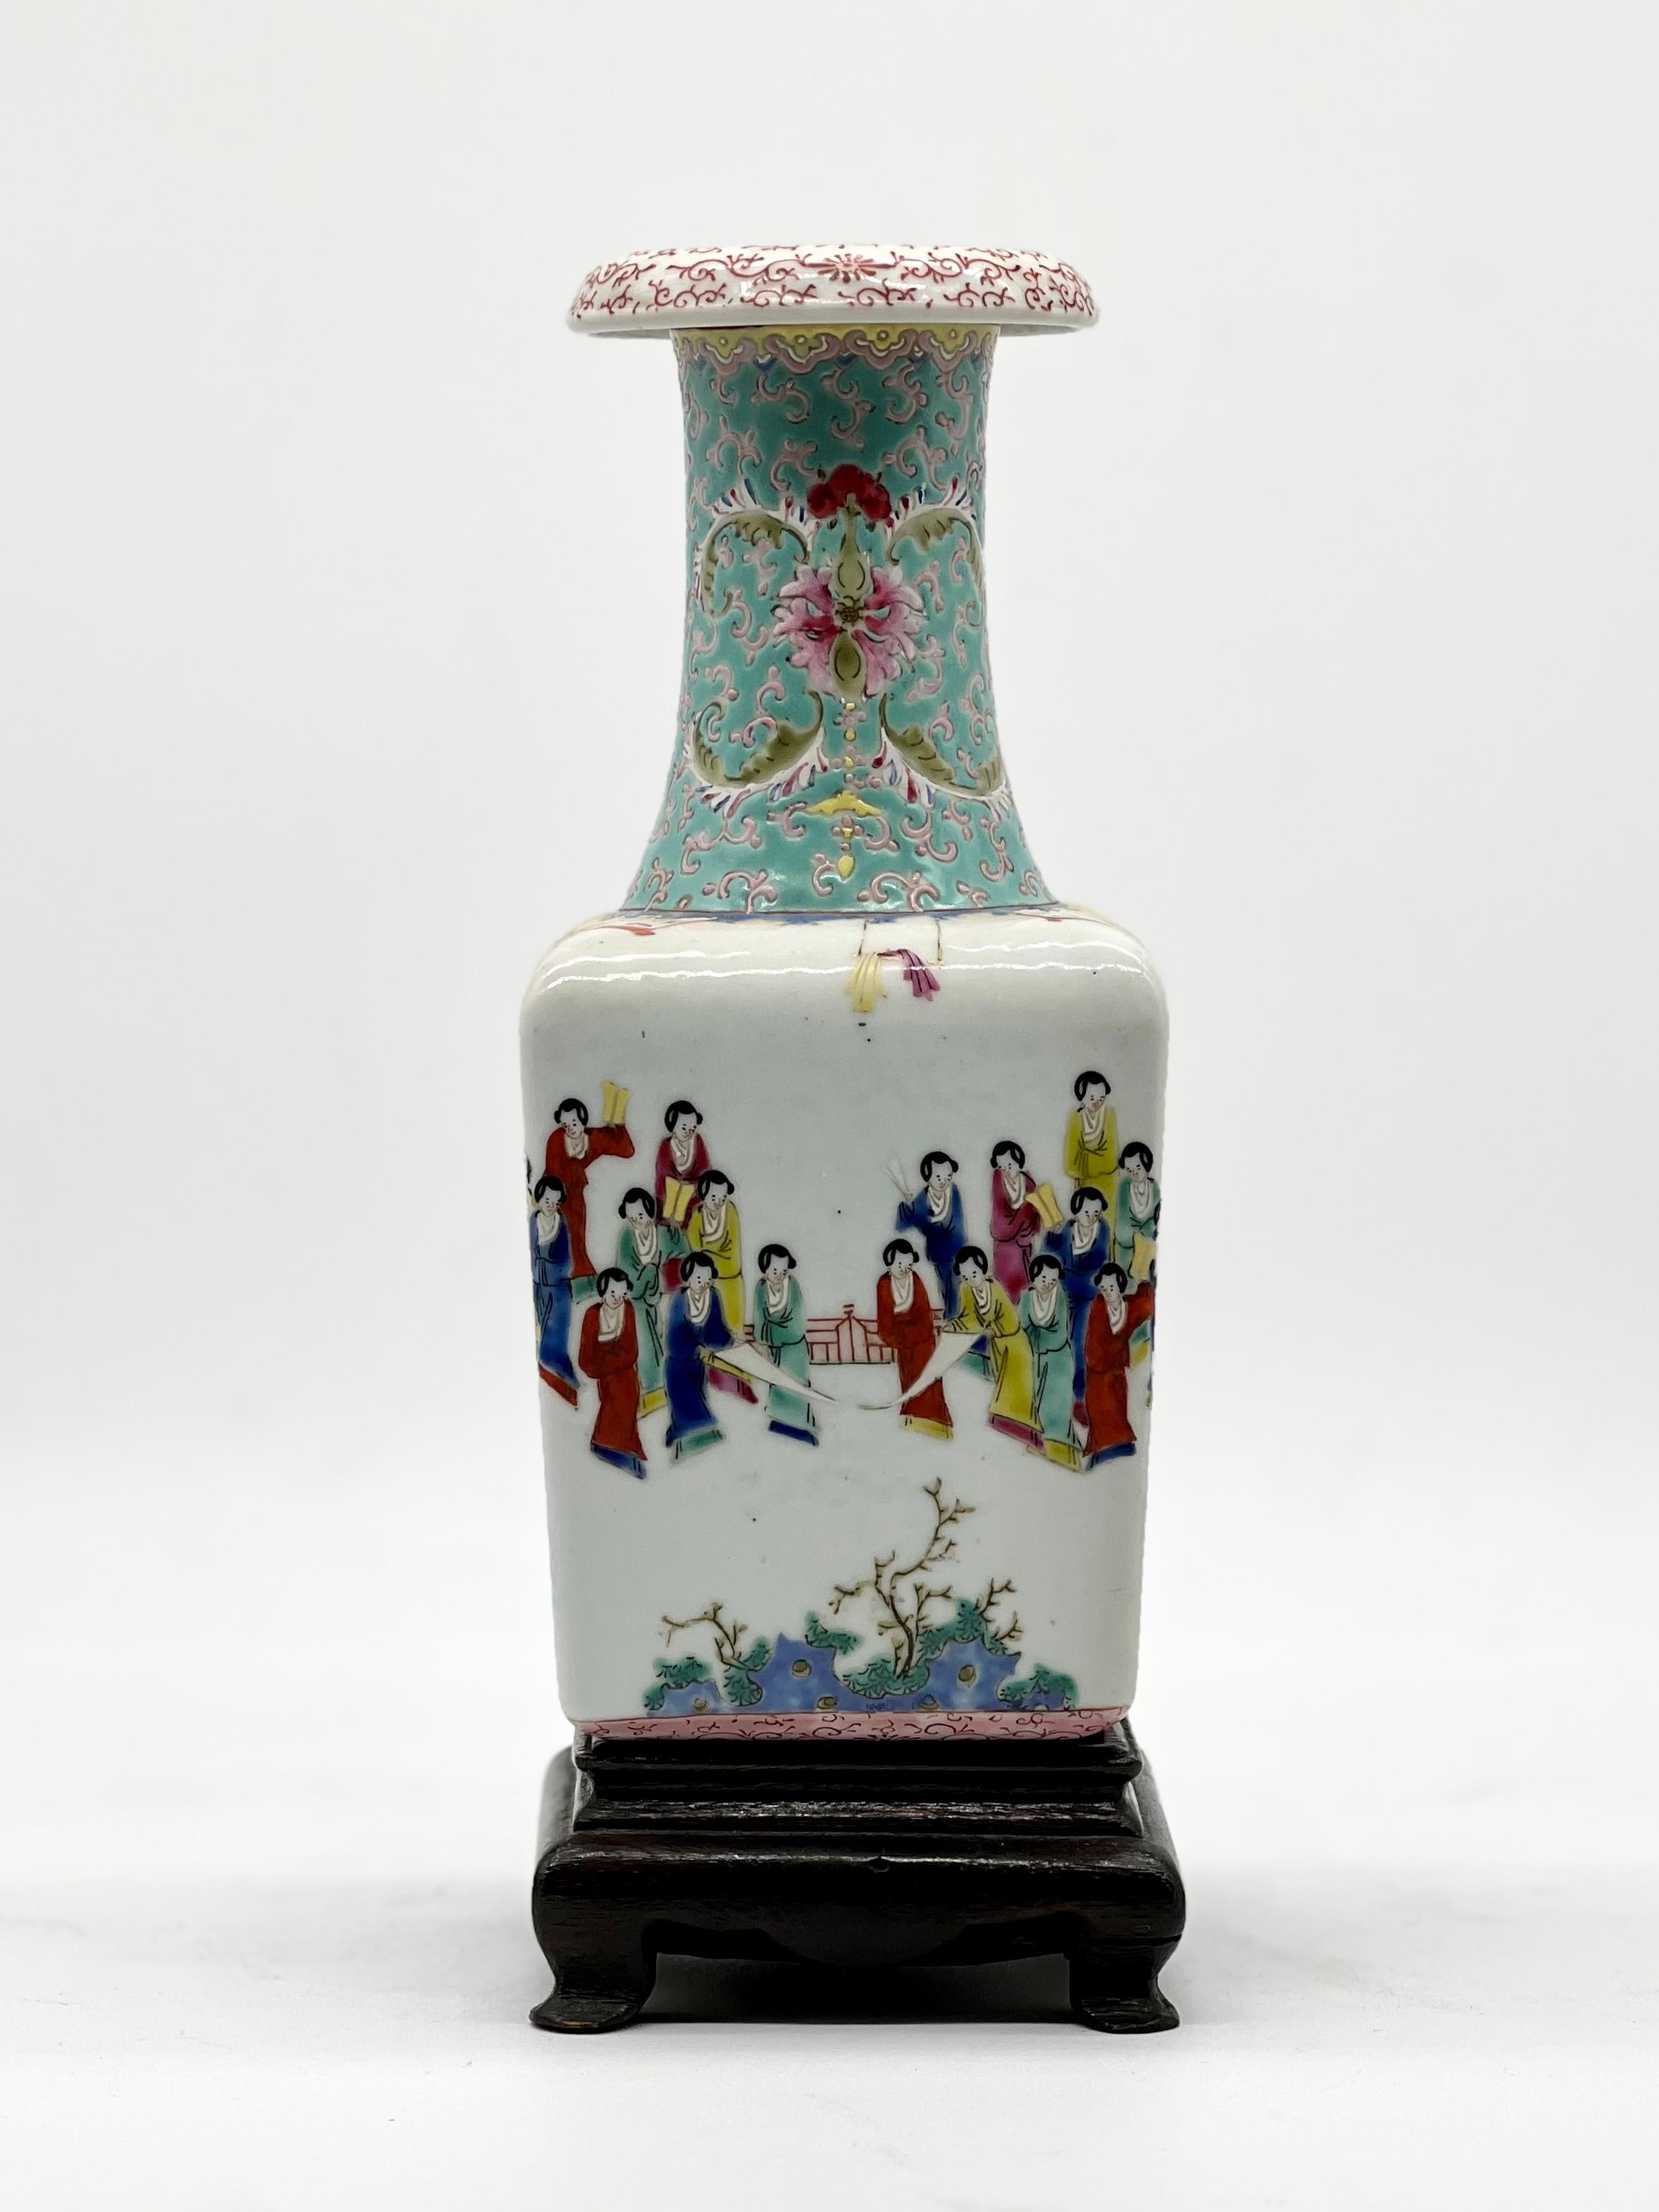 Ceramic Fine Chinese Famille-Rose Vase with Women Enjoying Scholarly Pursuits, 19th C